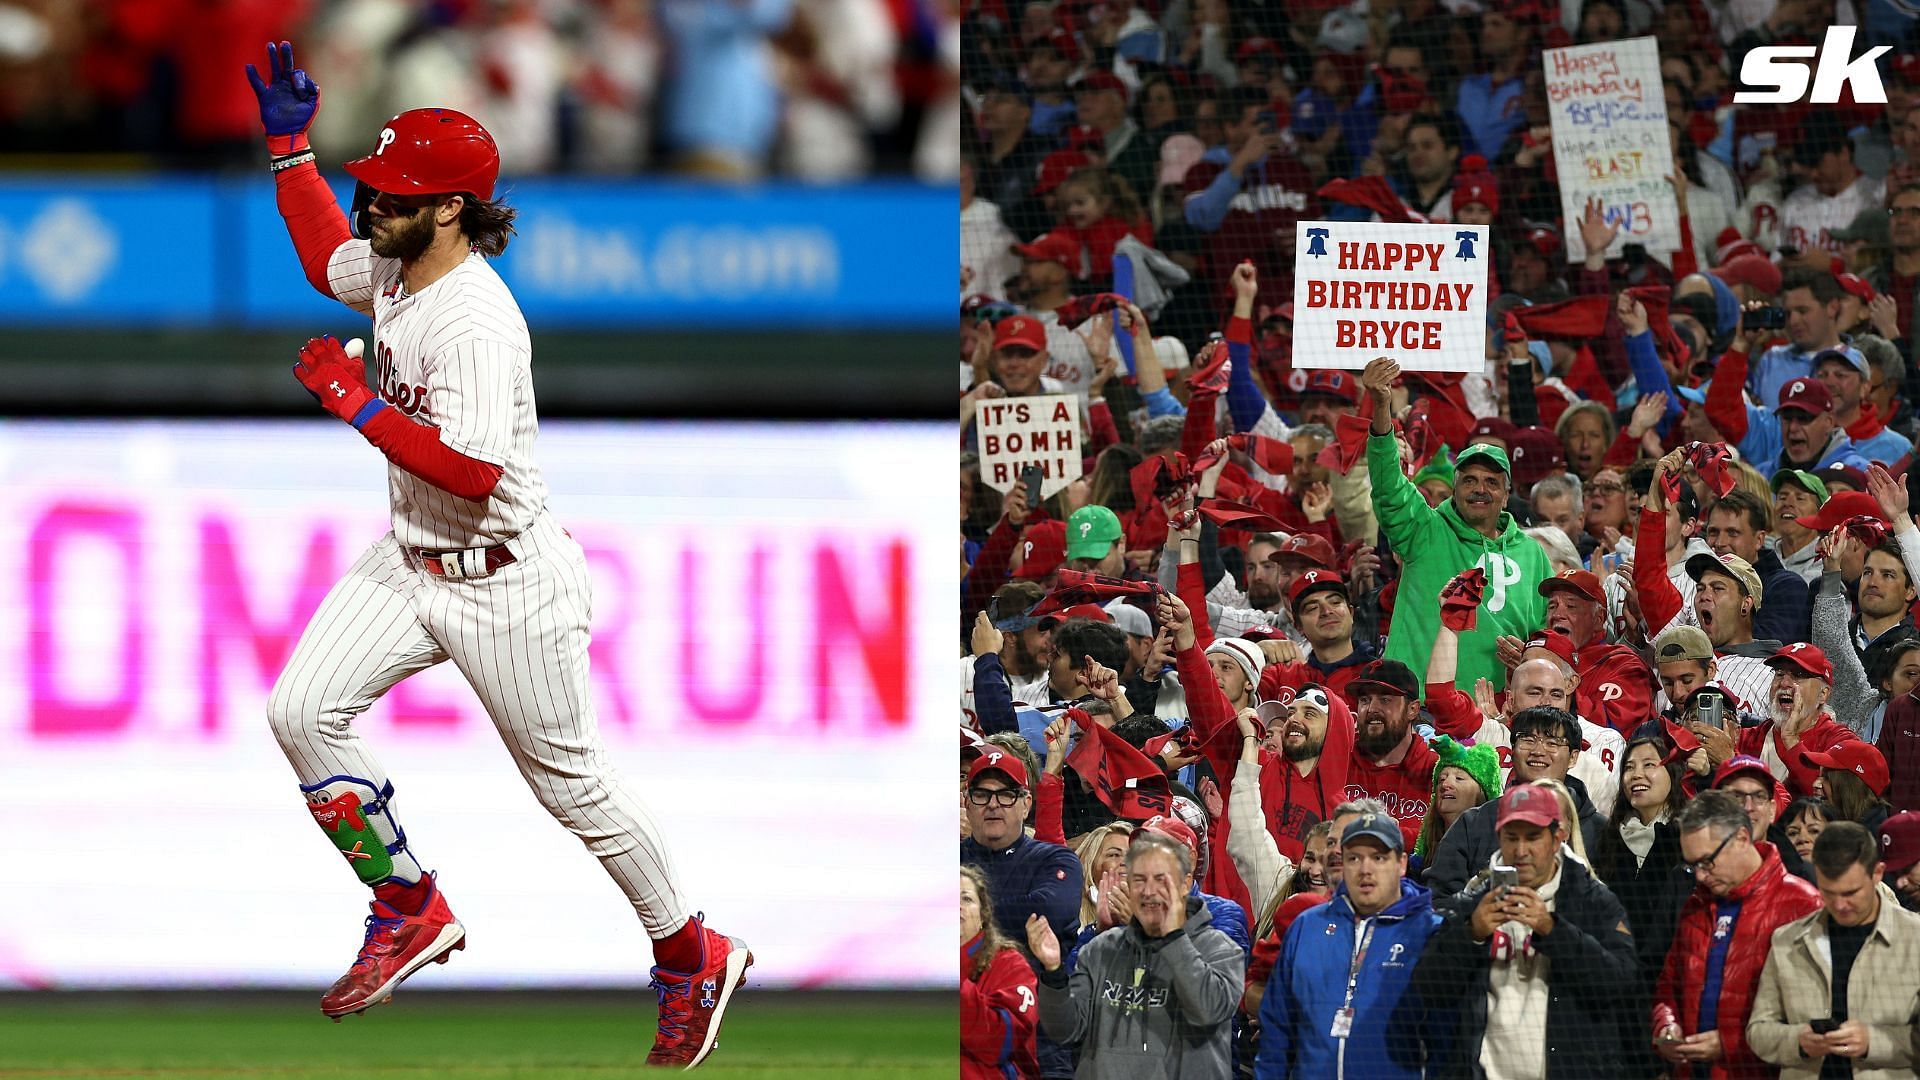 MLB fans in awe of Bryce Harper&rsquo;s birthday homer in explosive NLCS start. 